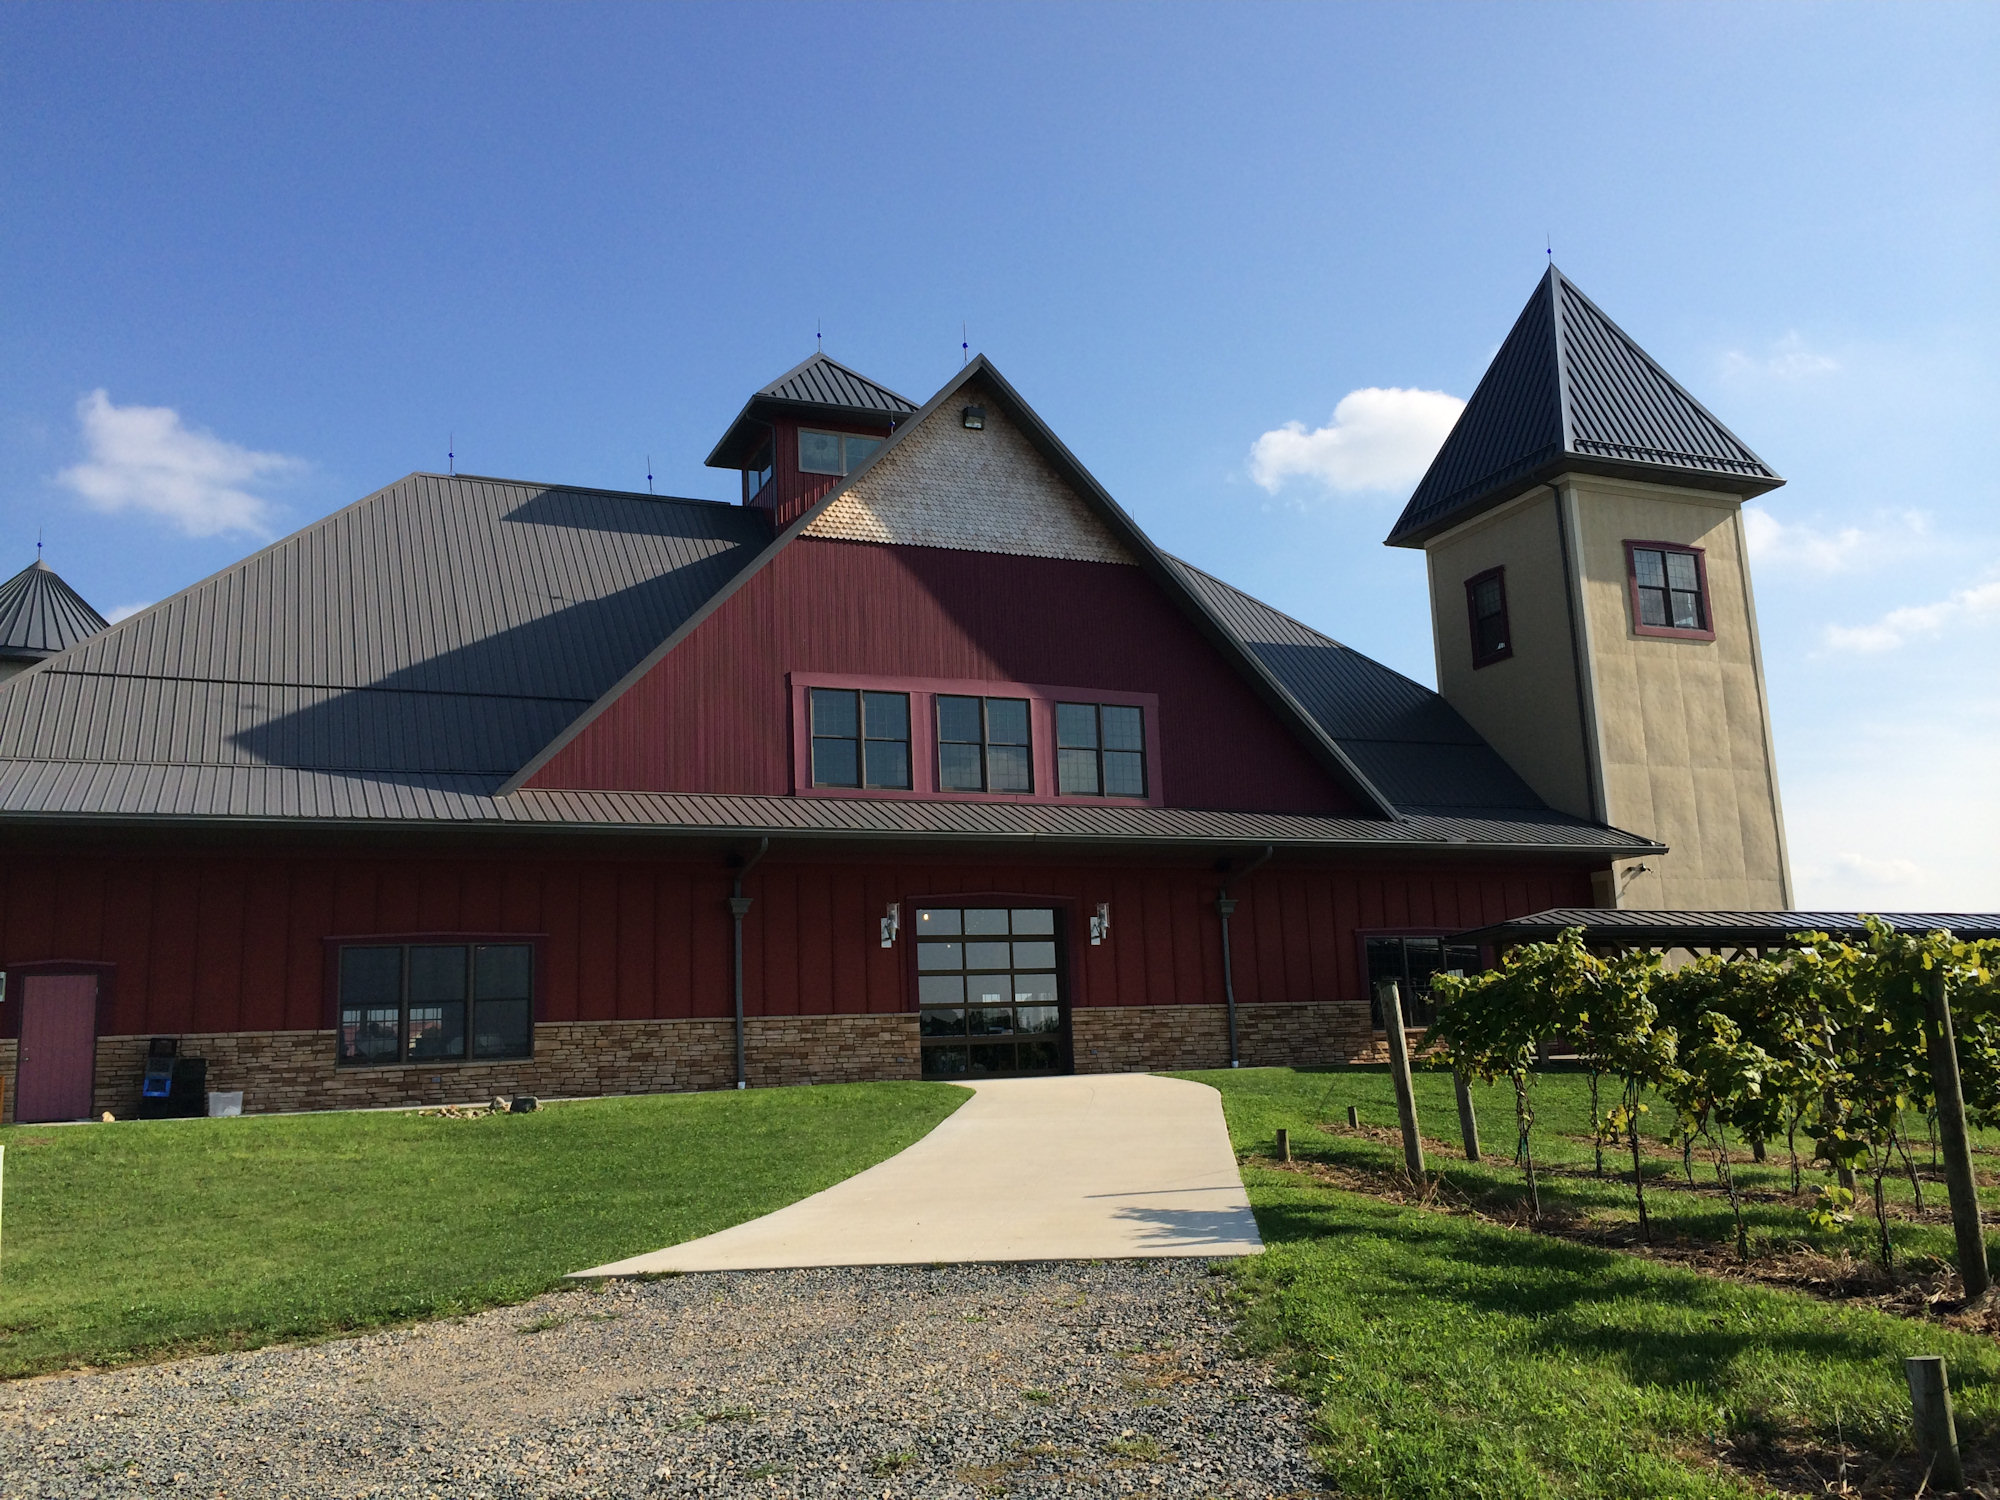 Breitenbach Wine Cellars – The Tool Shed is One Cool Shed